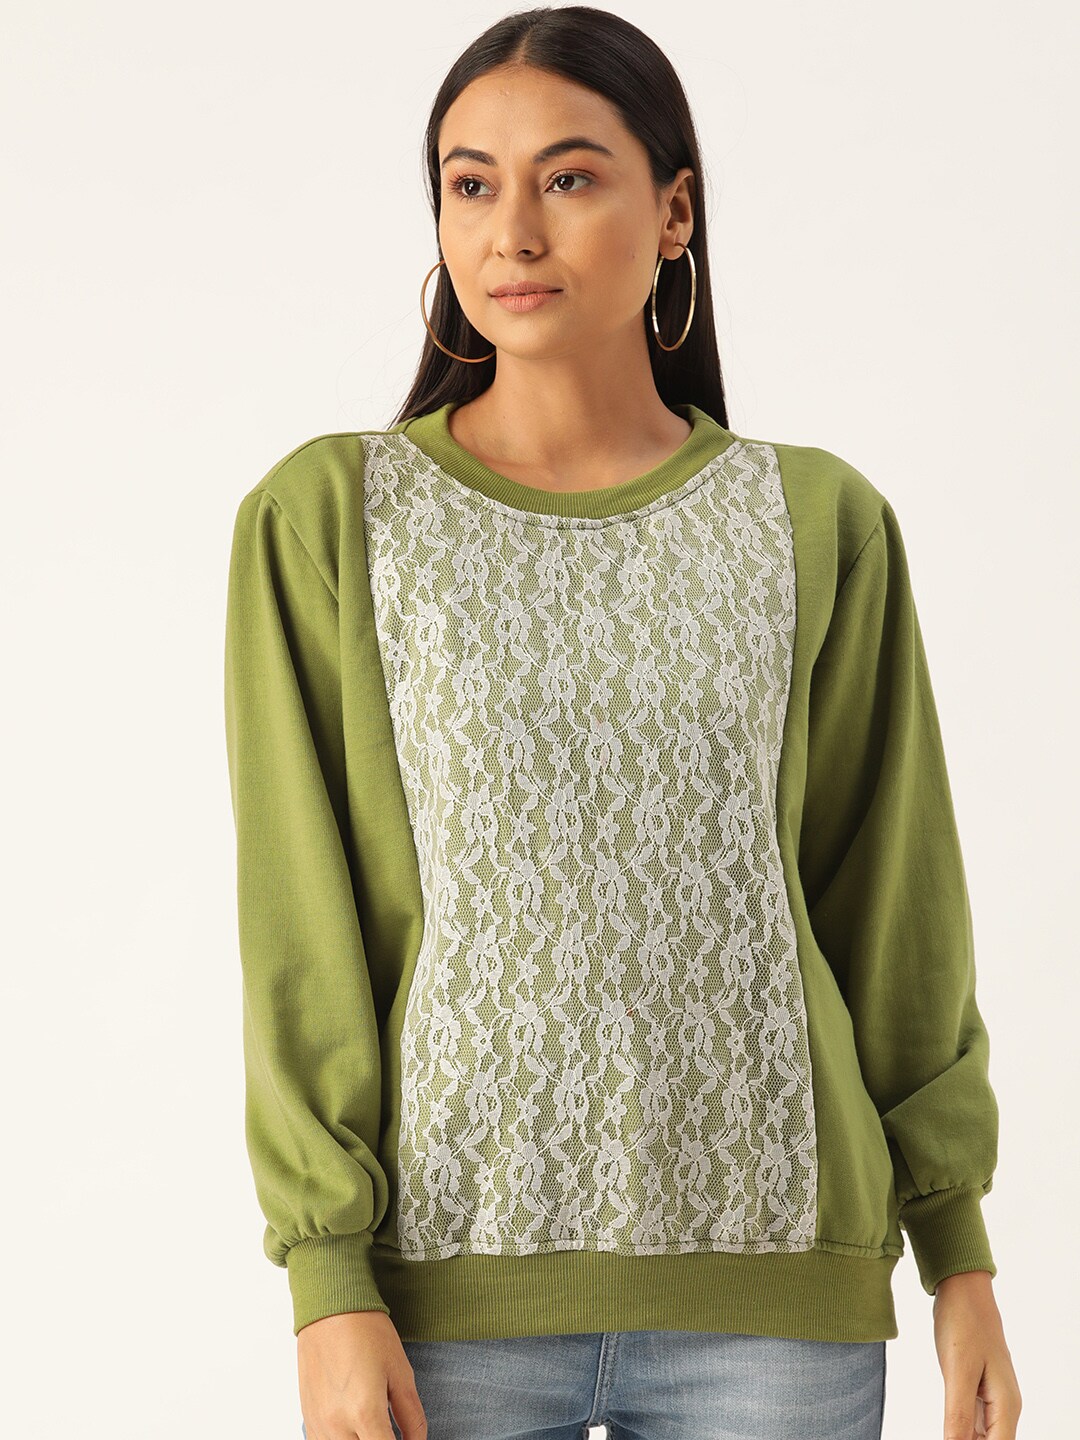 Belle Fille Olive Green and White Sweatshirt with Lace Inserts Price in India